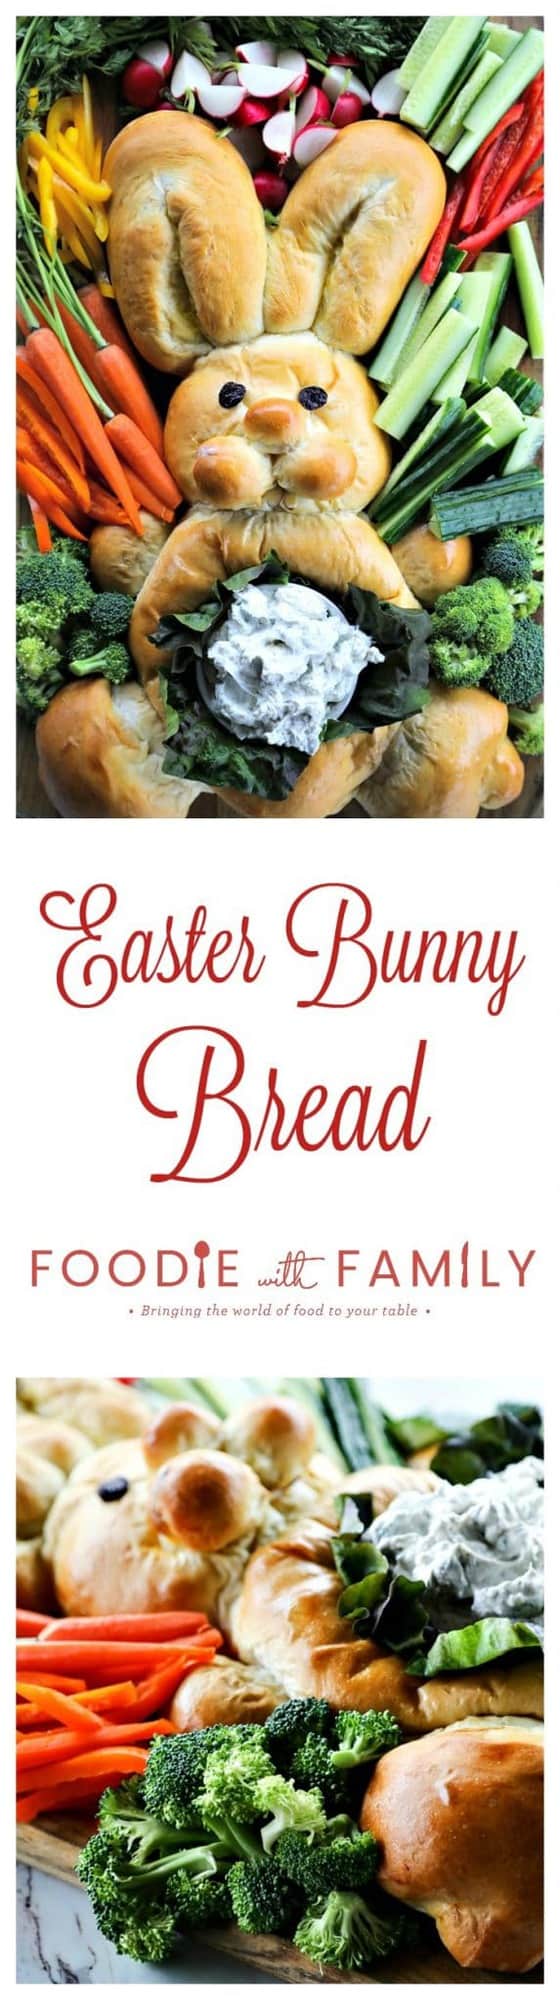 Add the tradition of Easter Bunny Bread to your Easter celebrations; kids and adults alike love it! Bonus: this post has a video tutorial showing how to form the bunny bread!